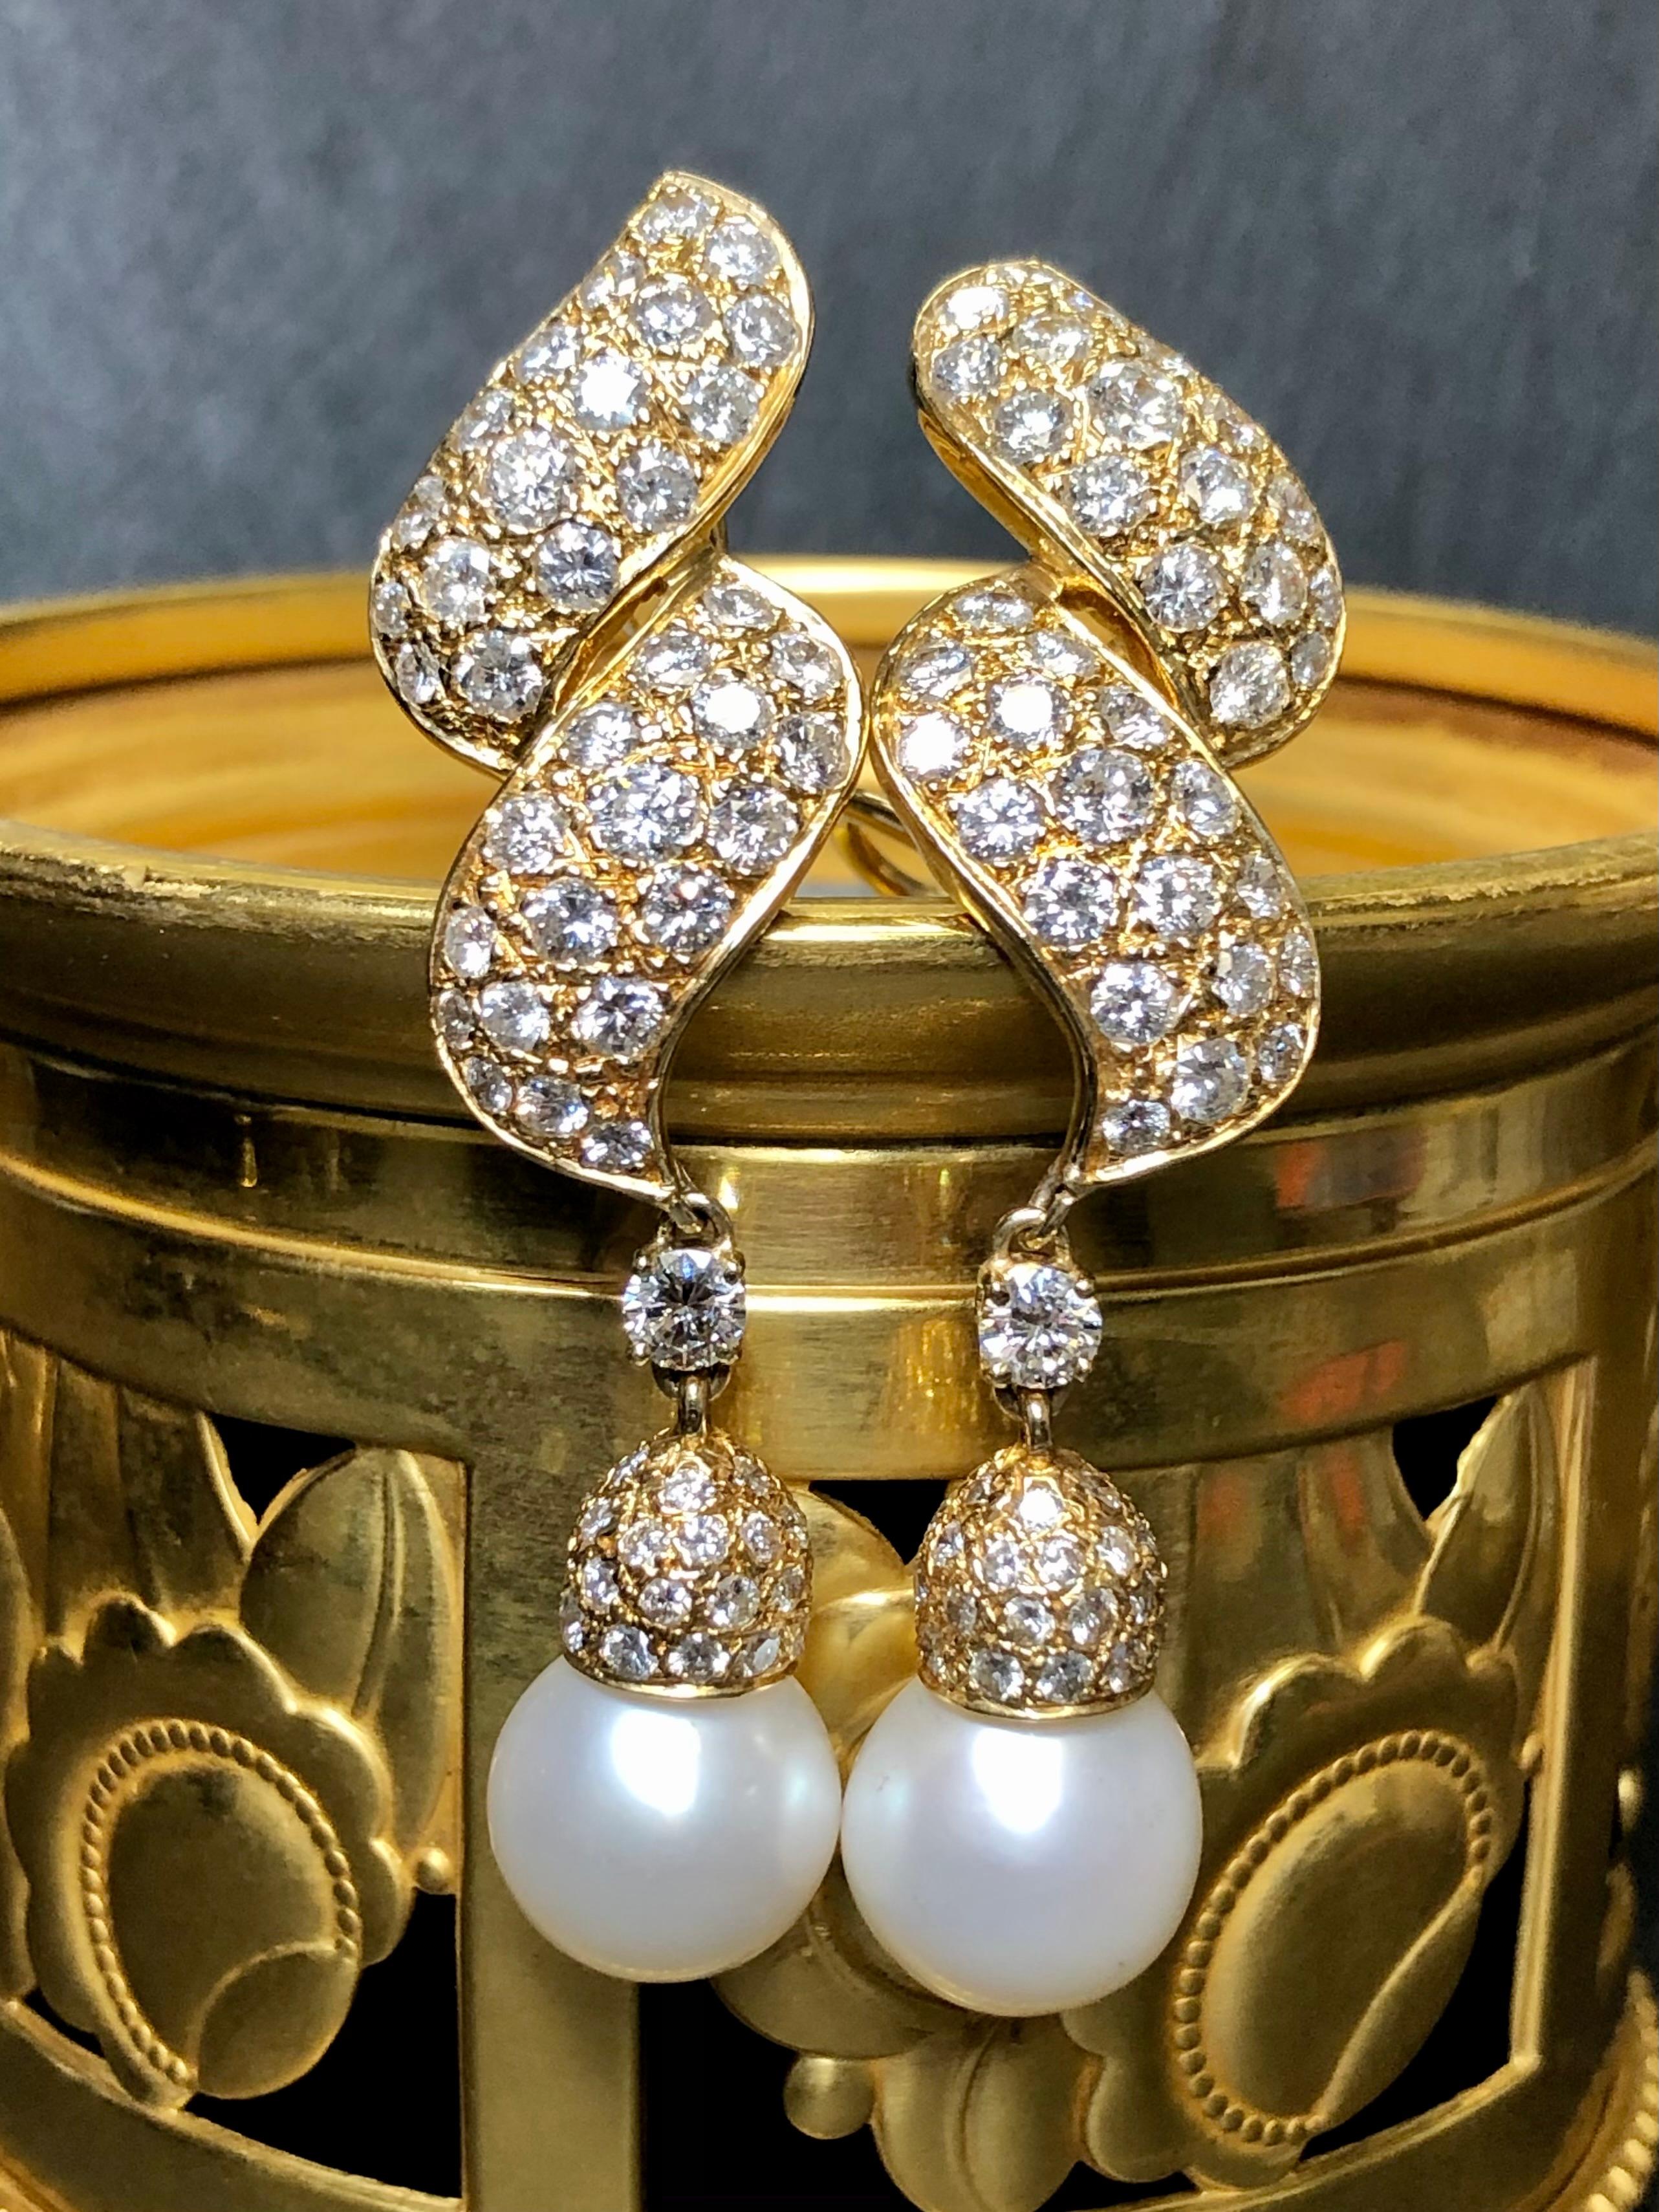 
A fabulous pair of pear drops done in 18K yellow gold and set with approximately 6.65cttw in H-J color Vs1 - Si2 clarity round diamonds. They are finished with 11.50mm and 11.60mm cream colored pearls and are pierced with omega